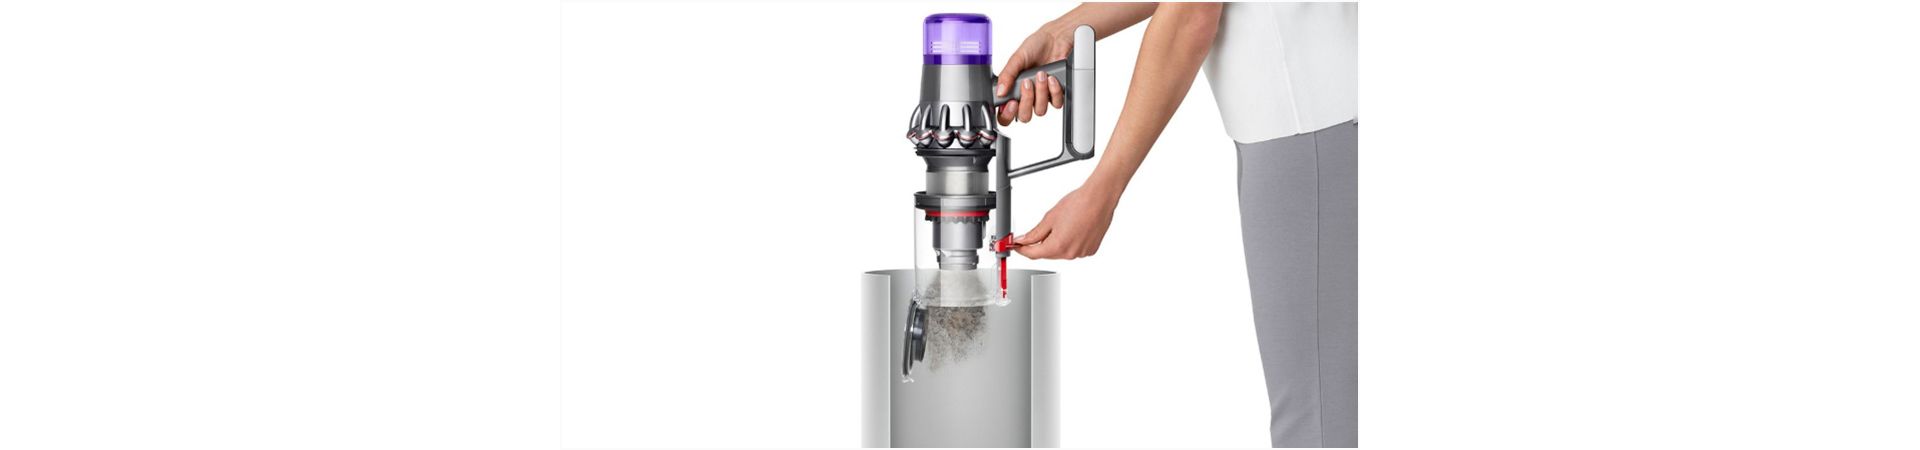 Dyson V11™ Absolute Extra vacuum cleaner for business | Dyson Australia